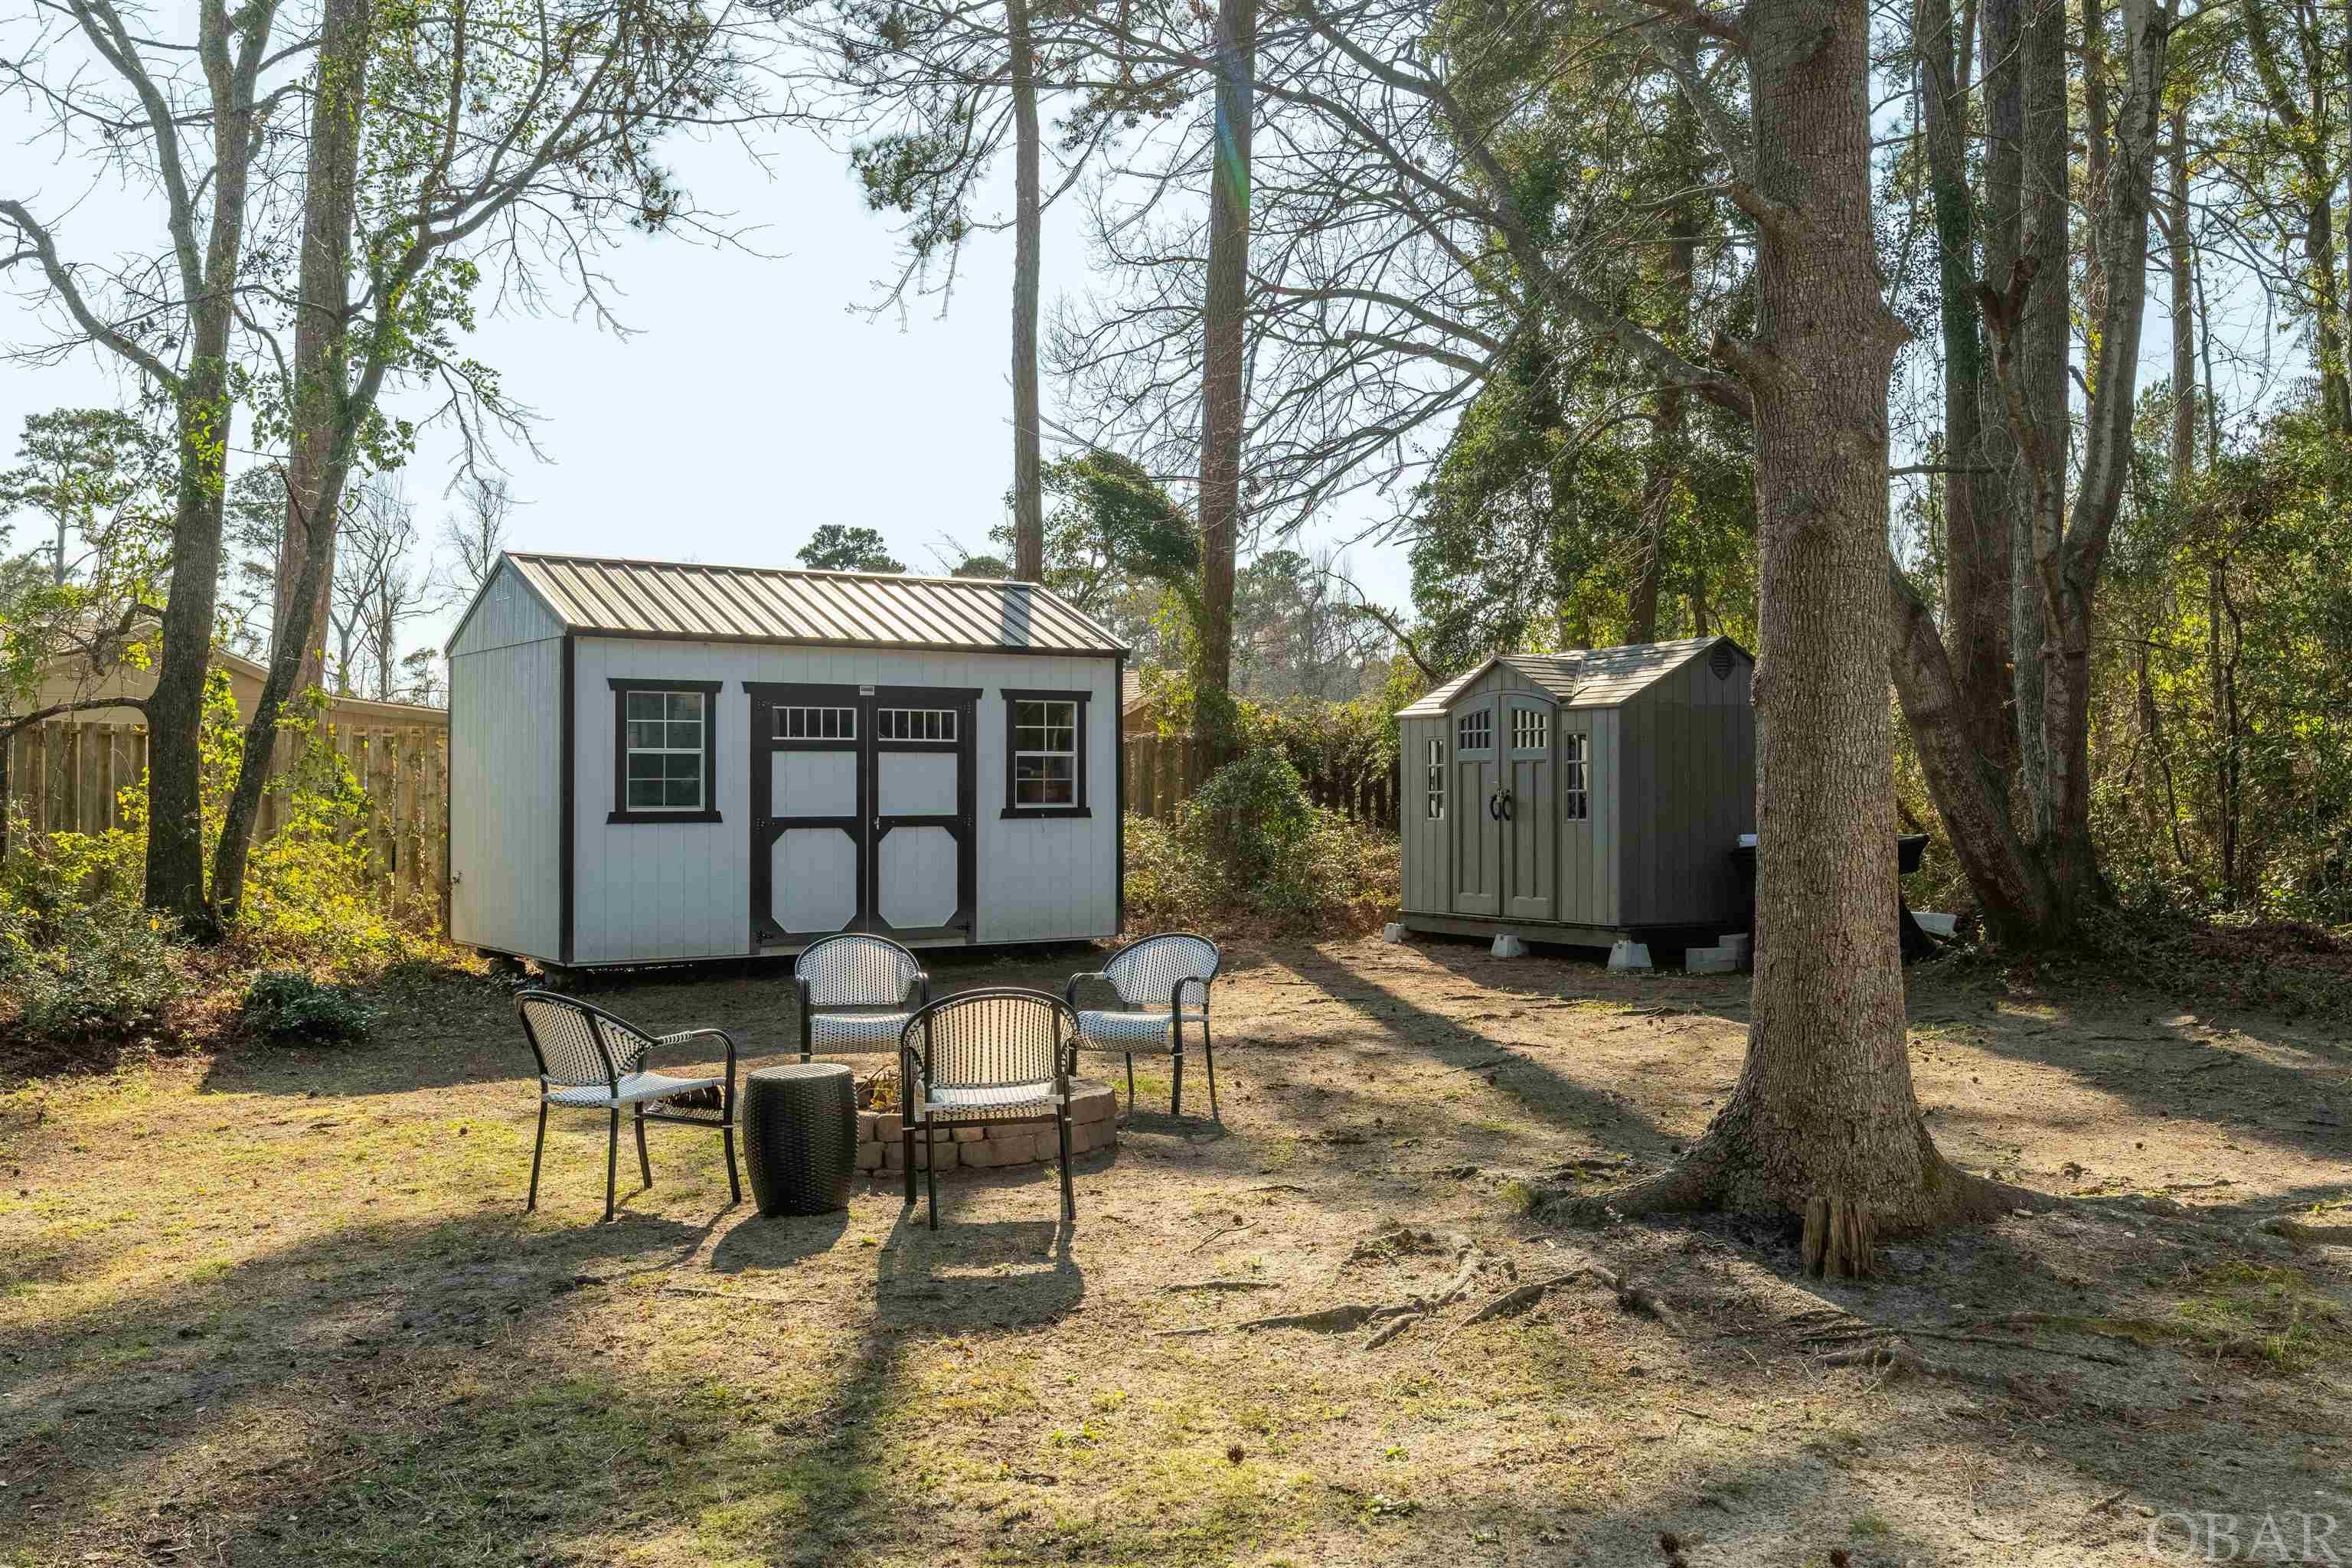 142 The Dogwoods, Manteo, NC 27954, 2 Bedrooms Bedrooms, ,1 BathroomBathrooms,Residential,For sale,The Dogwoods,125212